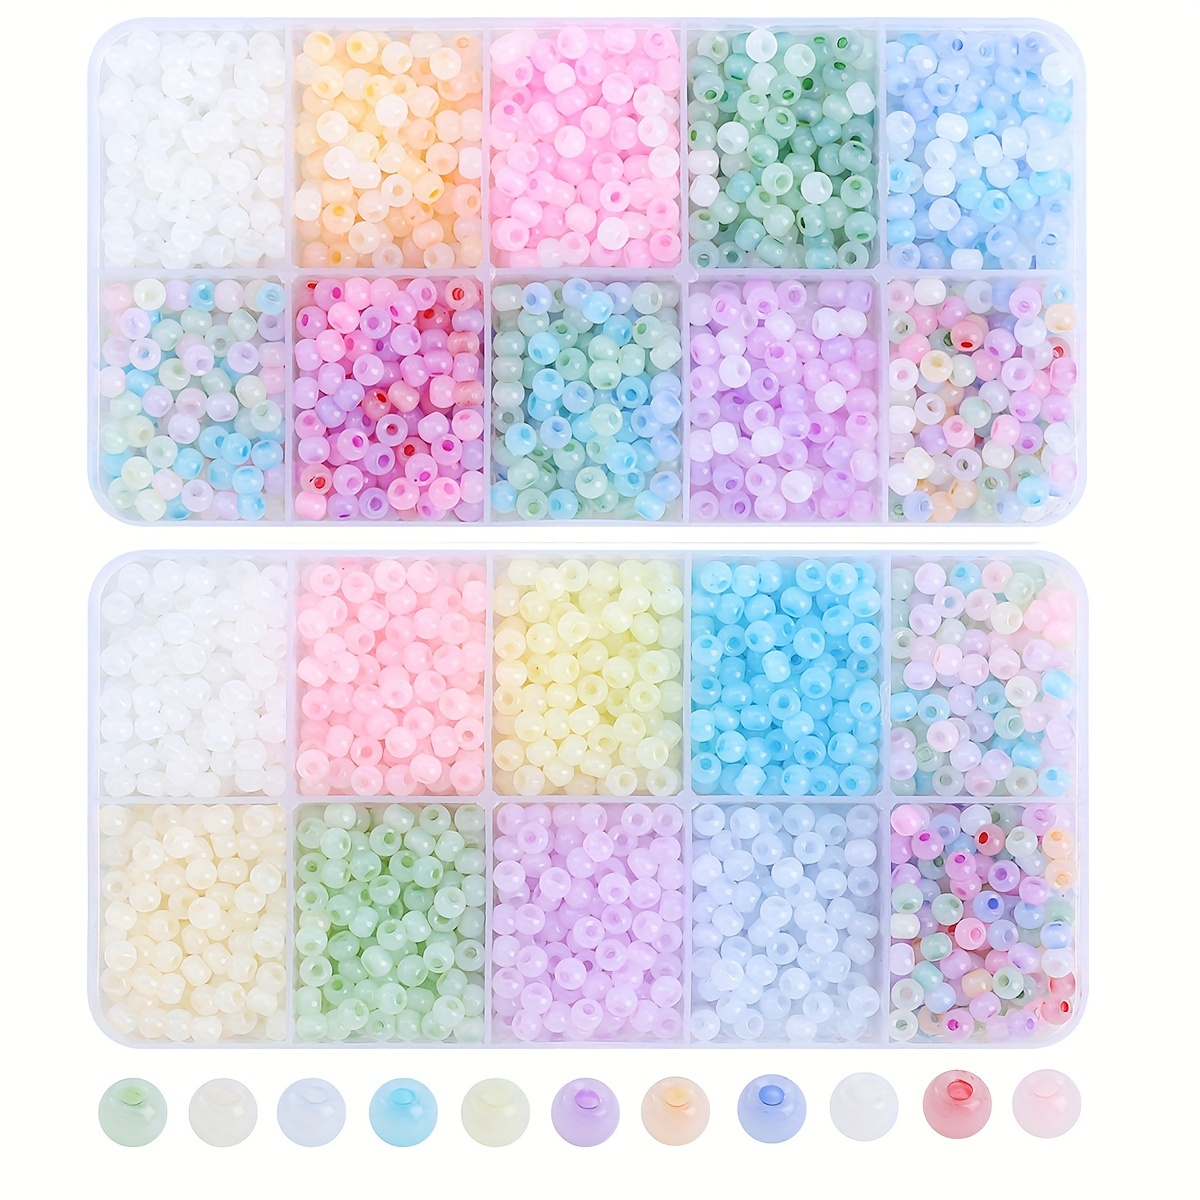 

1500-piece Cat Eye Jade Glass Seed Beads Kit, 4mm - Ideal For Diy Jewelry Making, Bracelets, Necklaces, Earrings | Perfect Mother's Day Craft Gift